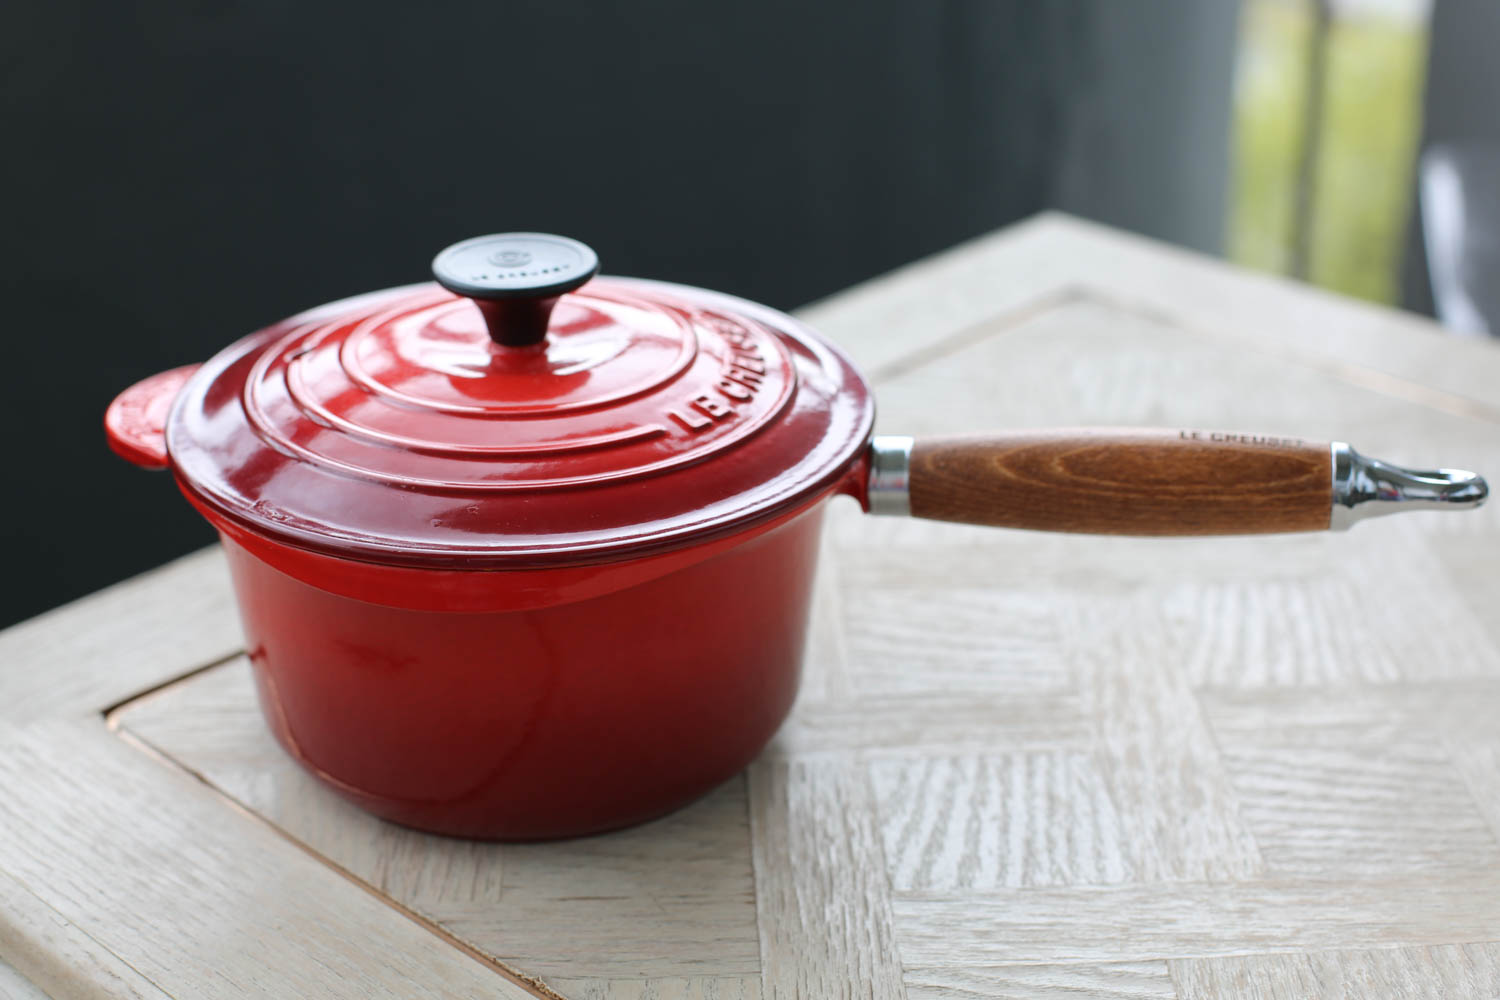 Le Creuset's L'Amour Cookware Collection Couldn't Be More Perfect